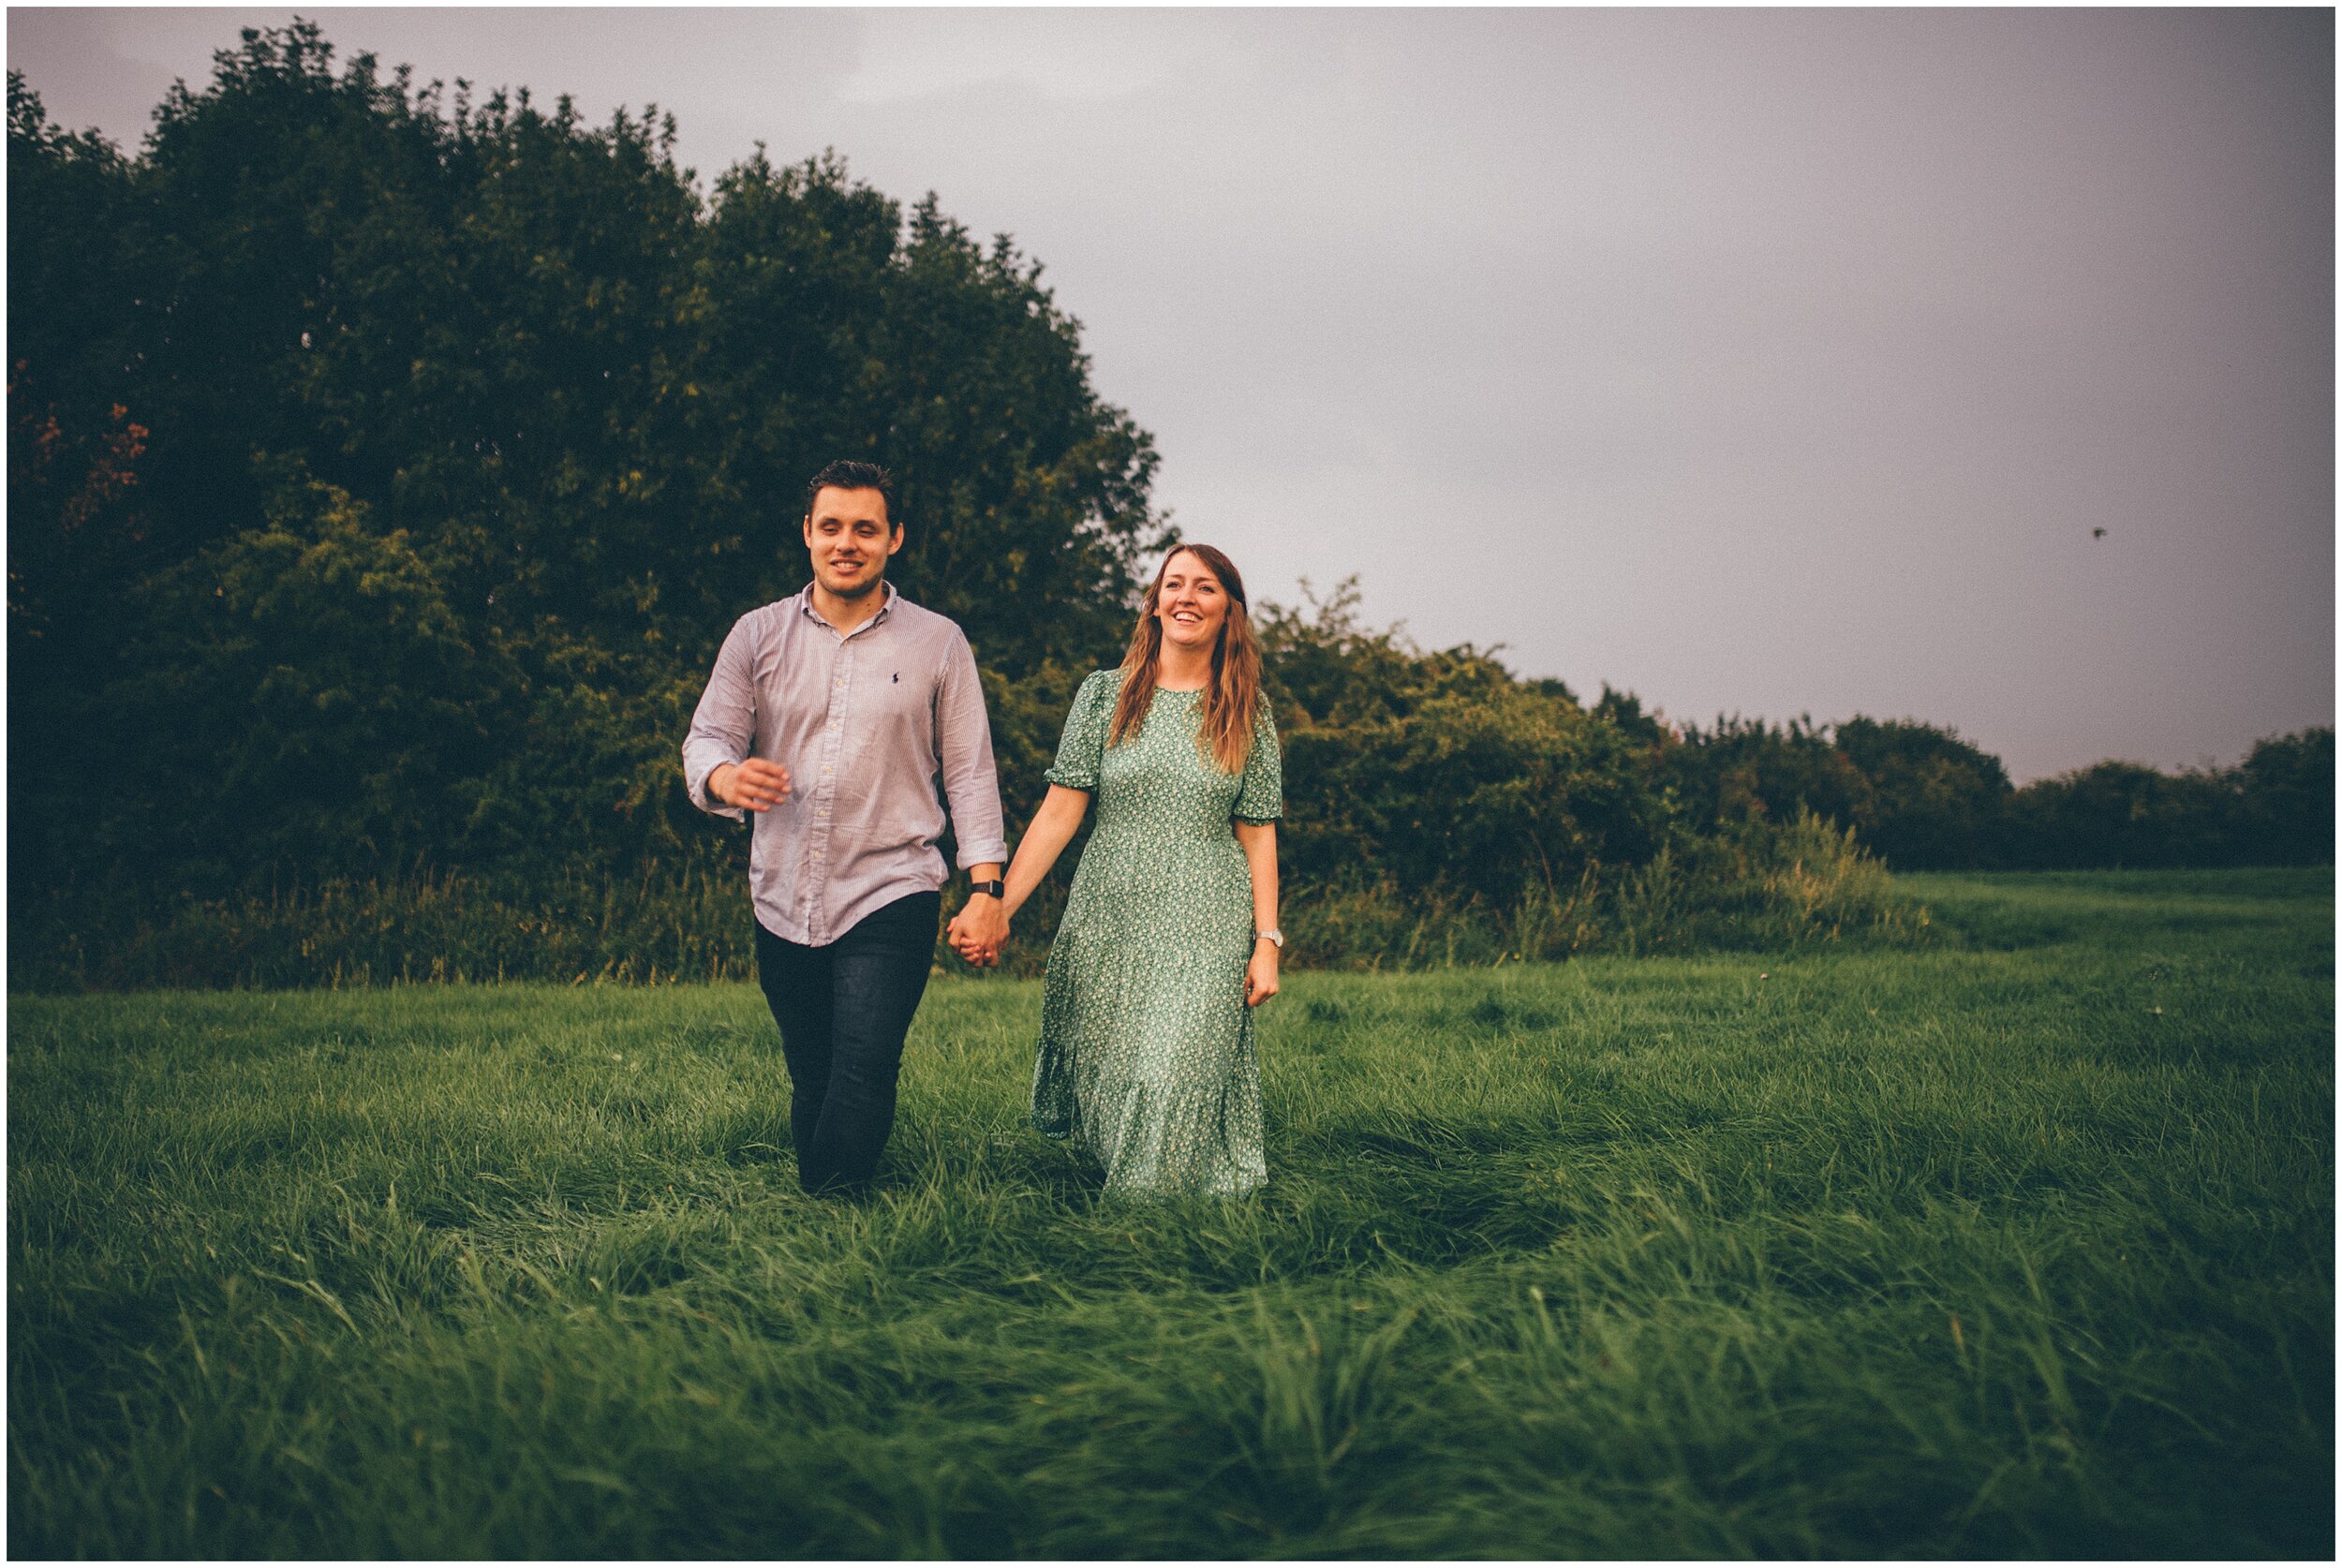 Golden hour as couple walk through Cheshire fields for rainy photoshoot.